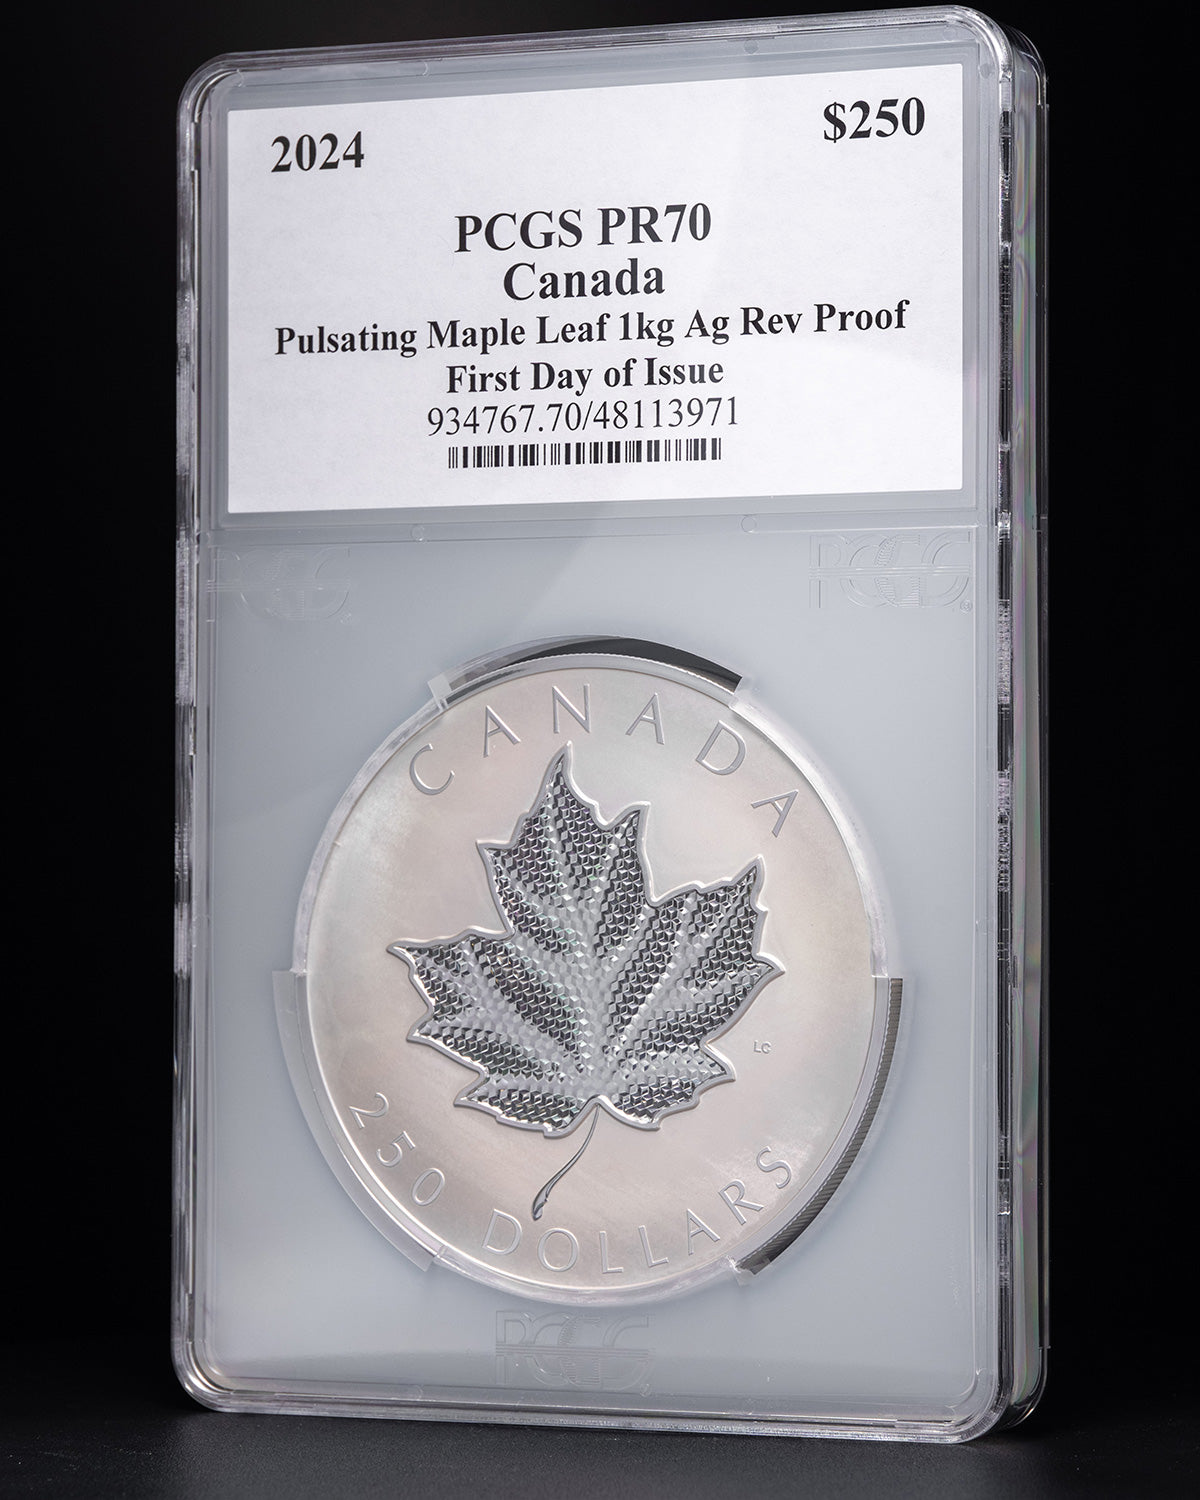 2024 1 Kilo $250 Canada Pulsating Maple Leaf | First Day of Issue PCGS PR70 Reverse Proof | Susanna Blunt Autographed